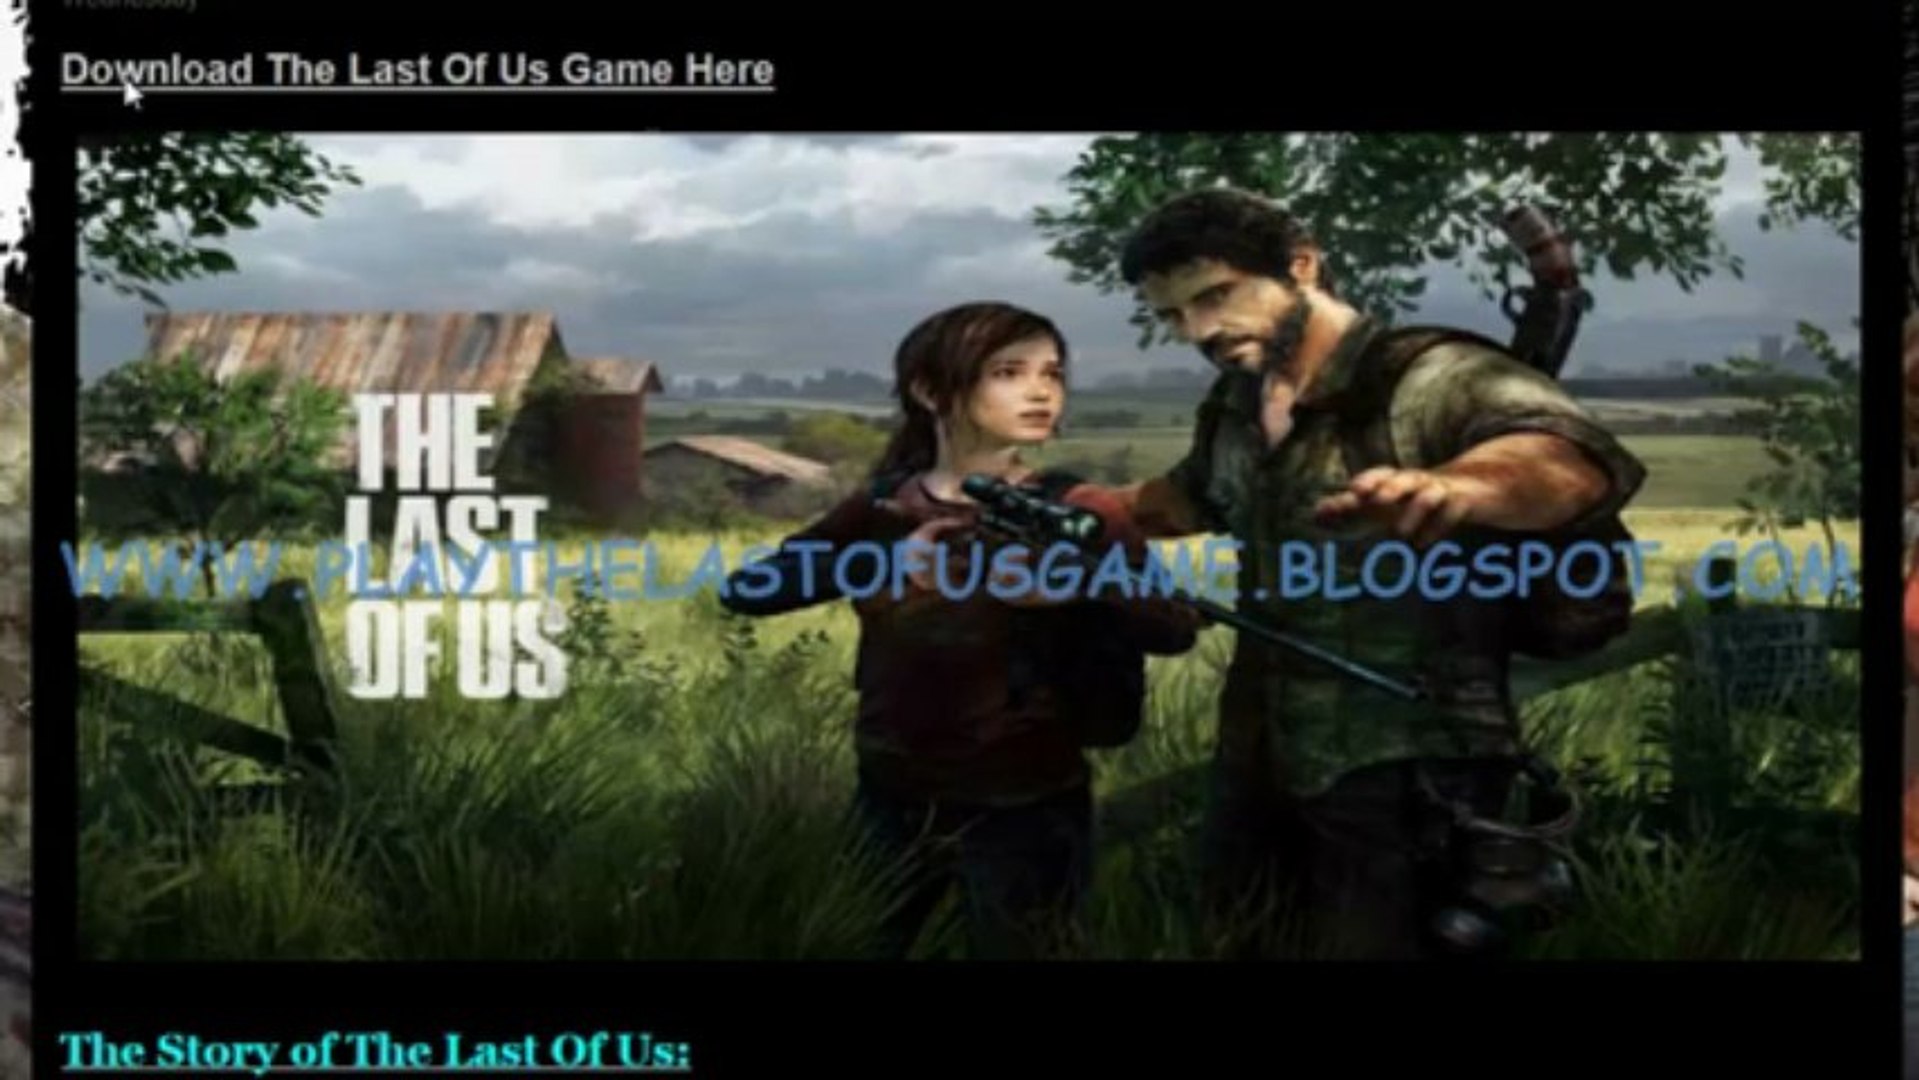 The Last of Us Download PC- Gameplay and the Story